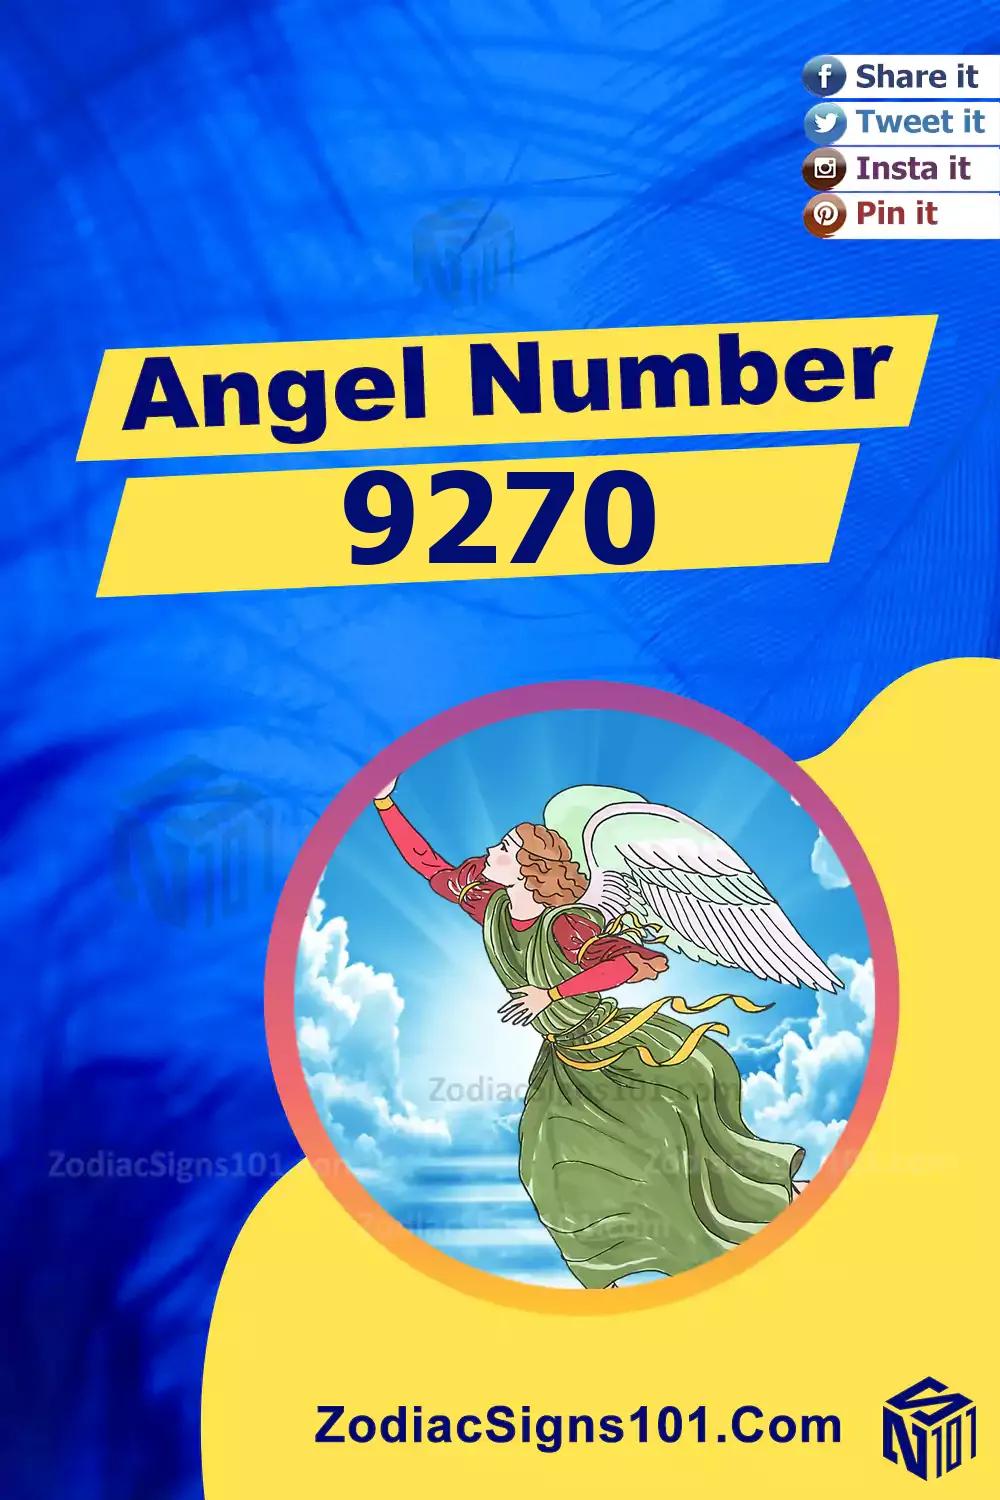 9270 Angel Number Meaning